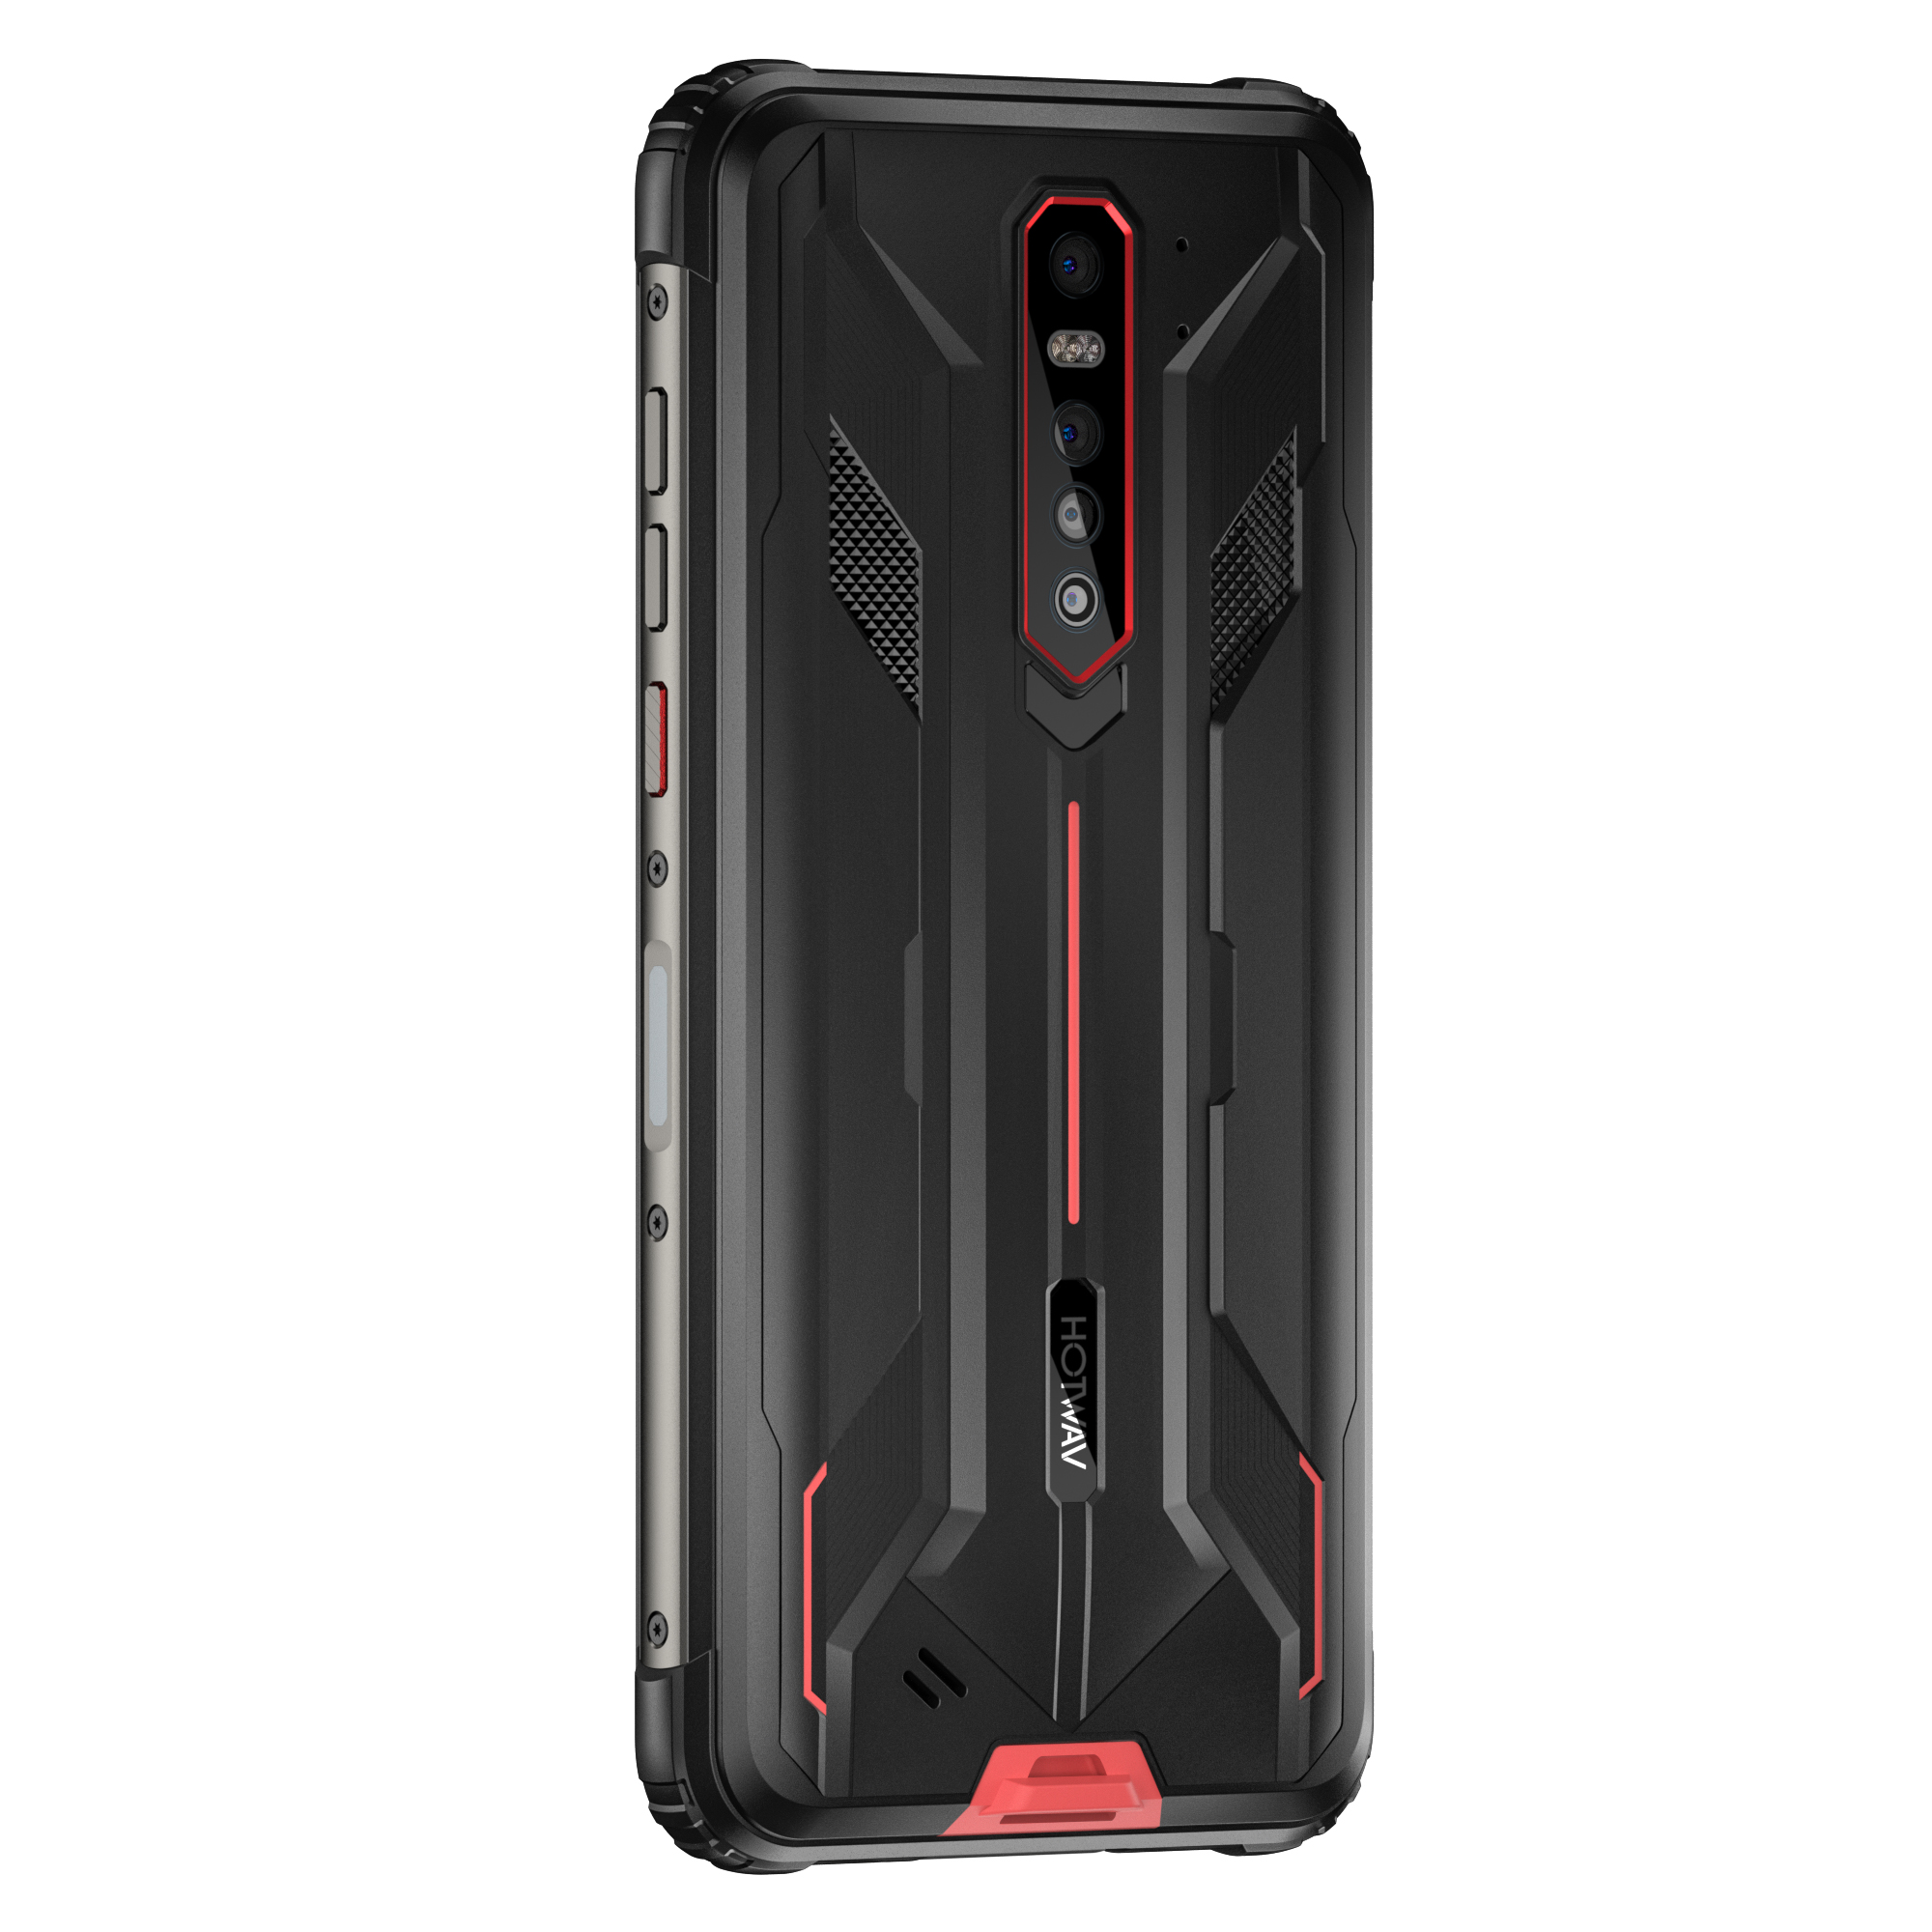 Find HOTWAV CYBER 7 5G Global Version 8GB 128GB Dimensity 700 IP68 IP69K Waterproof 8280mAh 48MP Camera 20MP Night Vision Camera 6 3 inch NFC Android 11 Rugged Smartphone for Sale on Gipsybee.com with cryptocurrencies